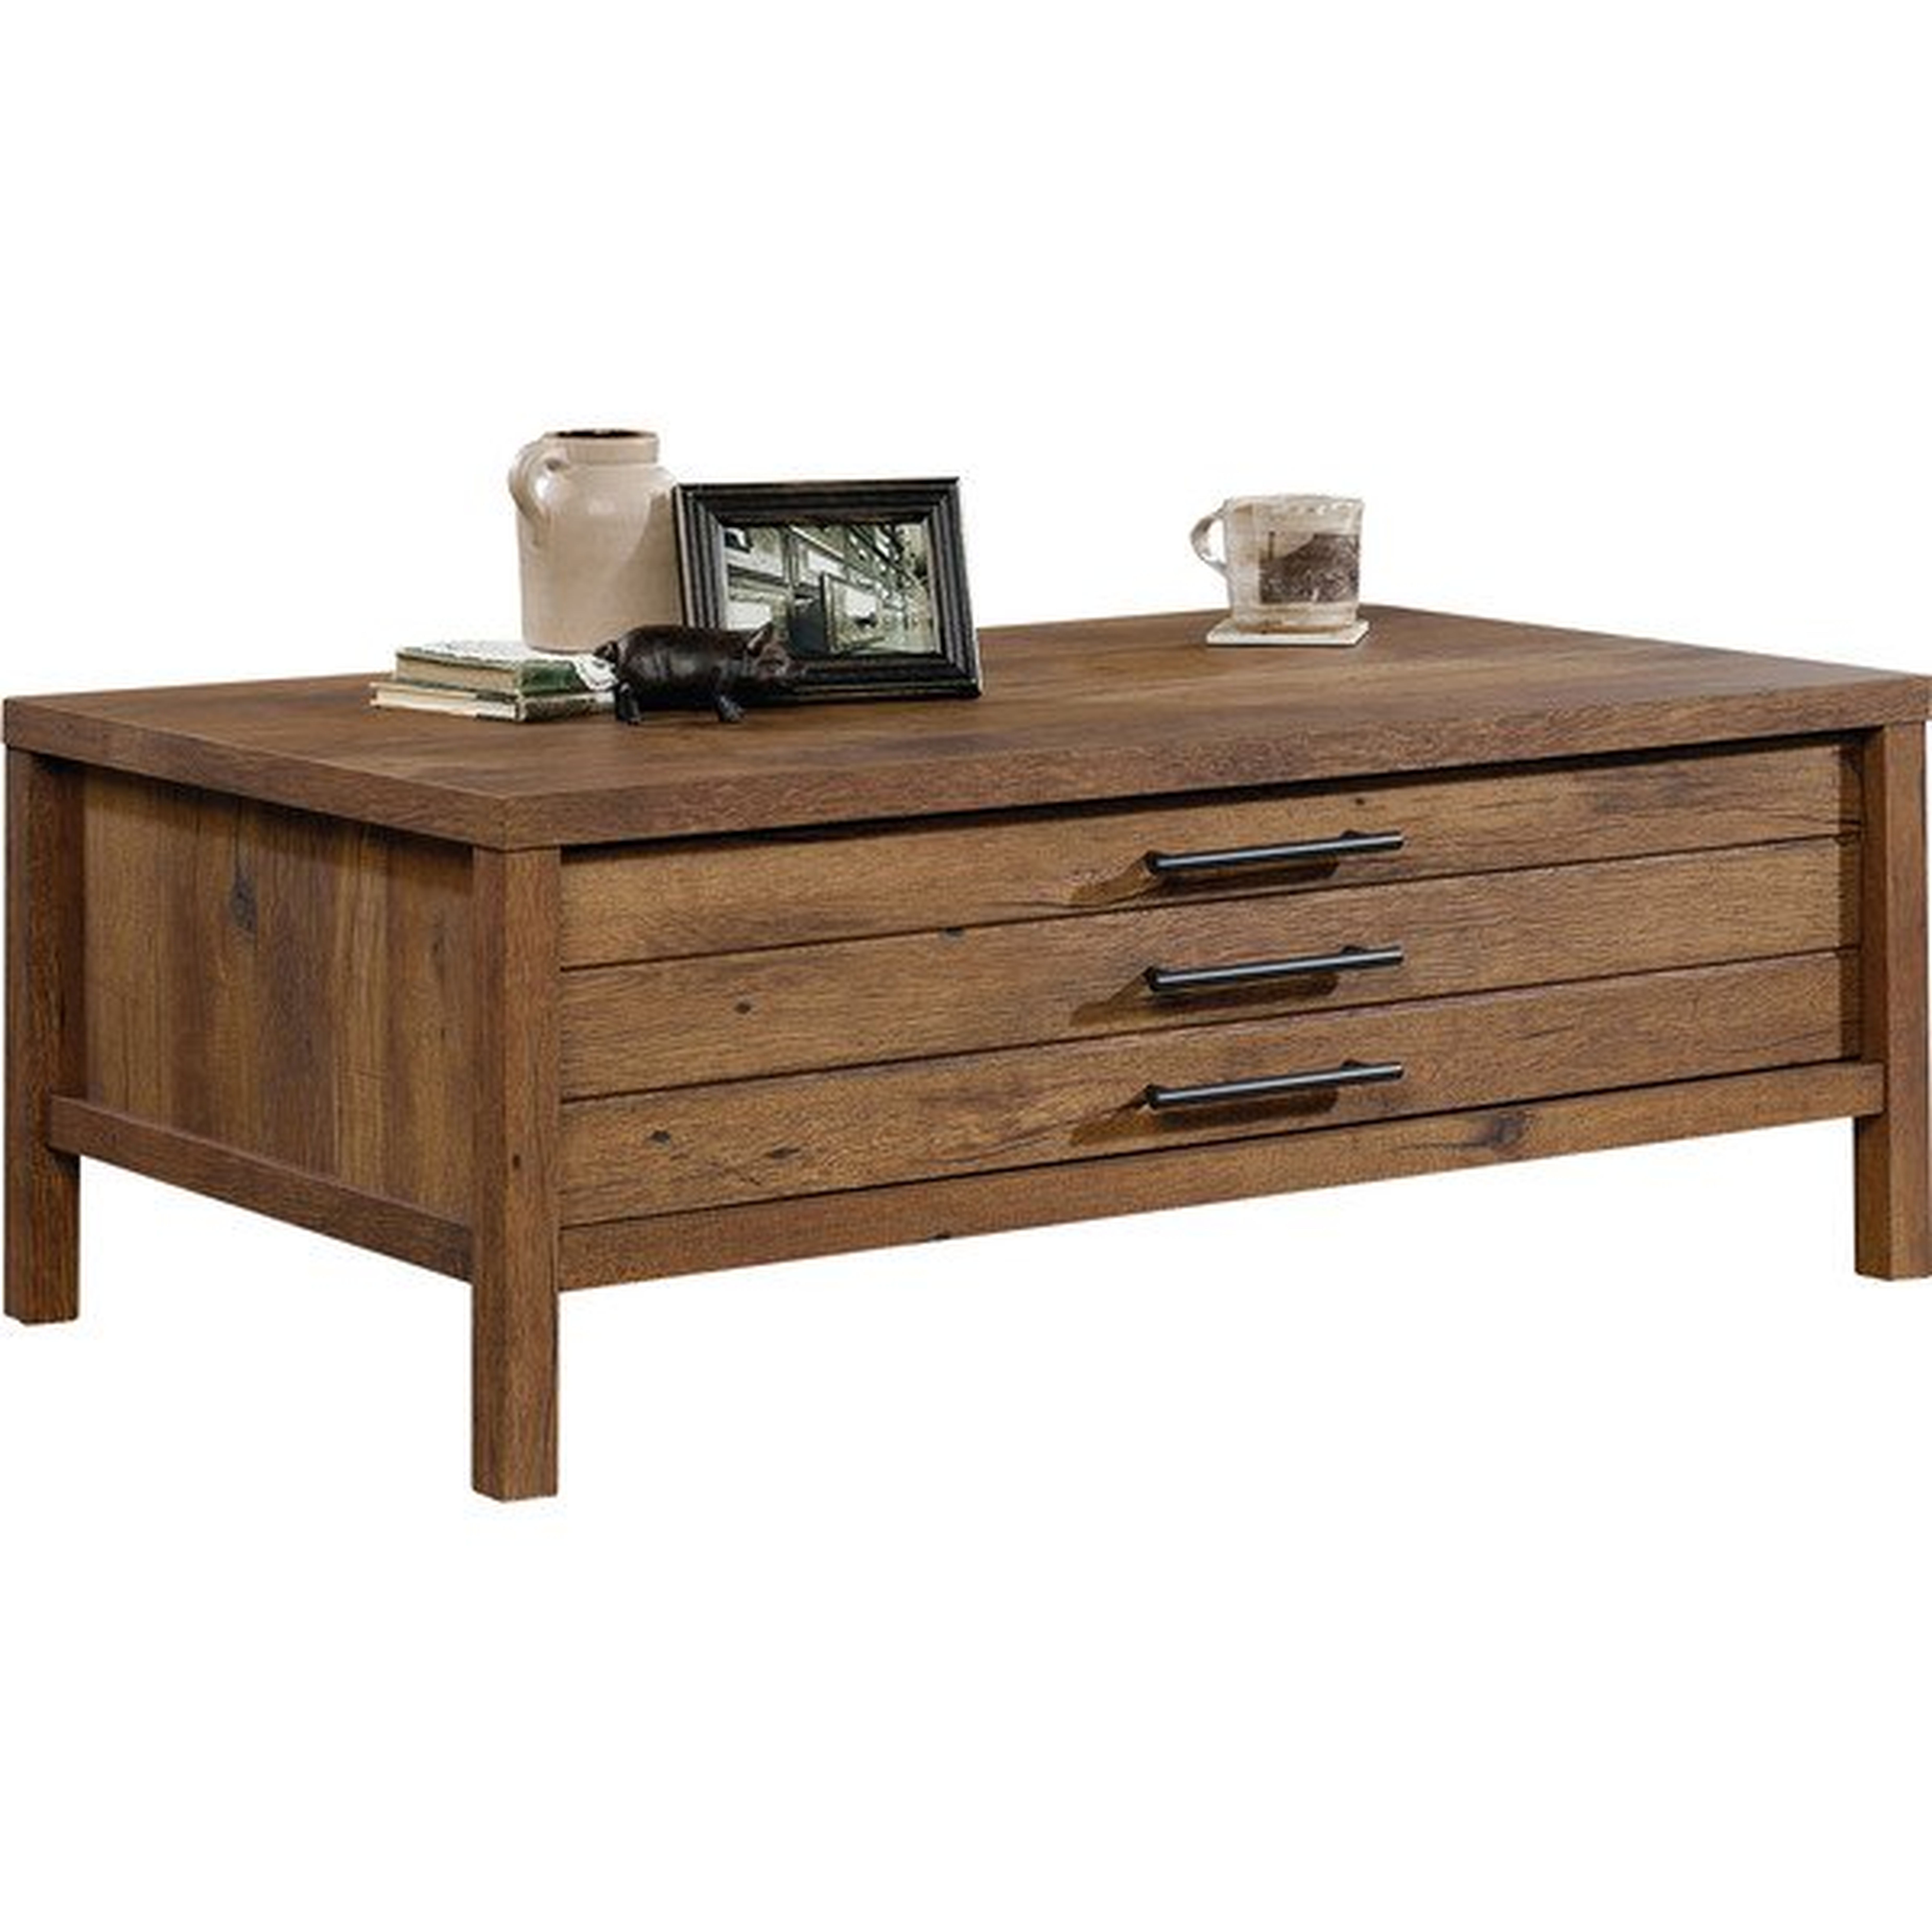 Odile Coffee Table with Storage - Birch Lane